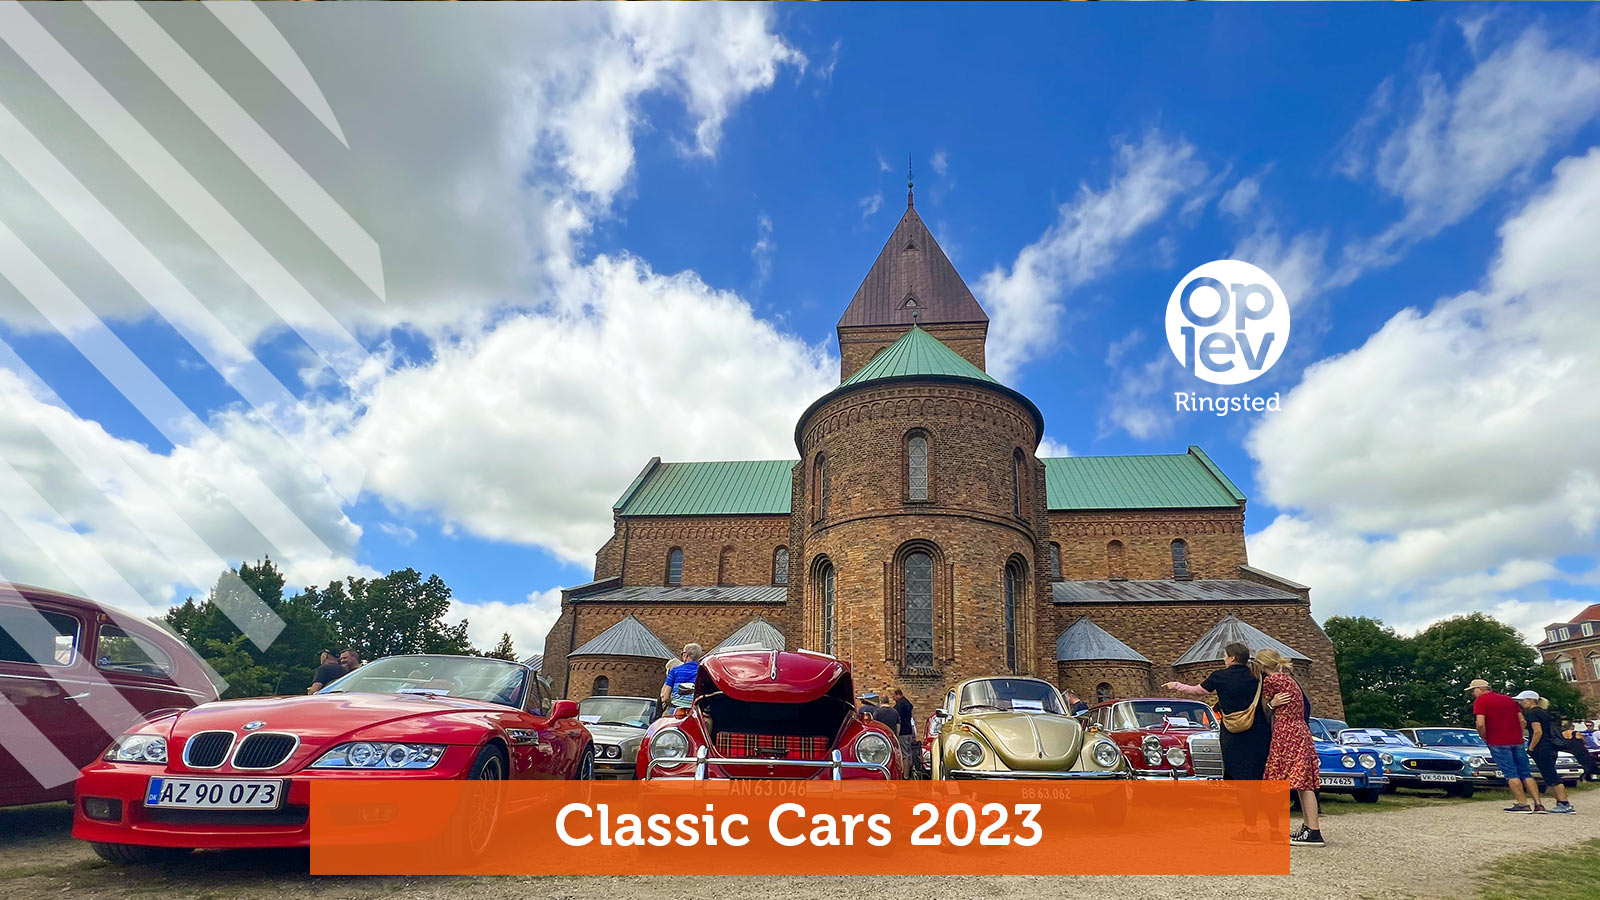 Classic Cars 2023 - Ringsted - Racelens